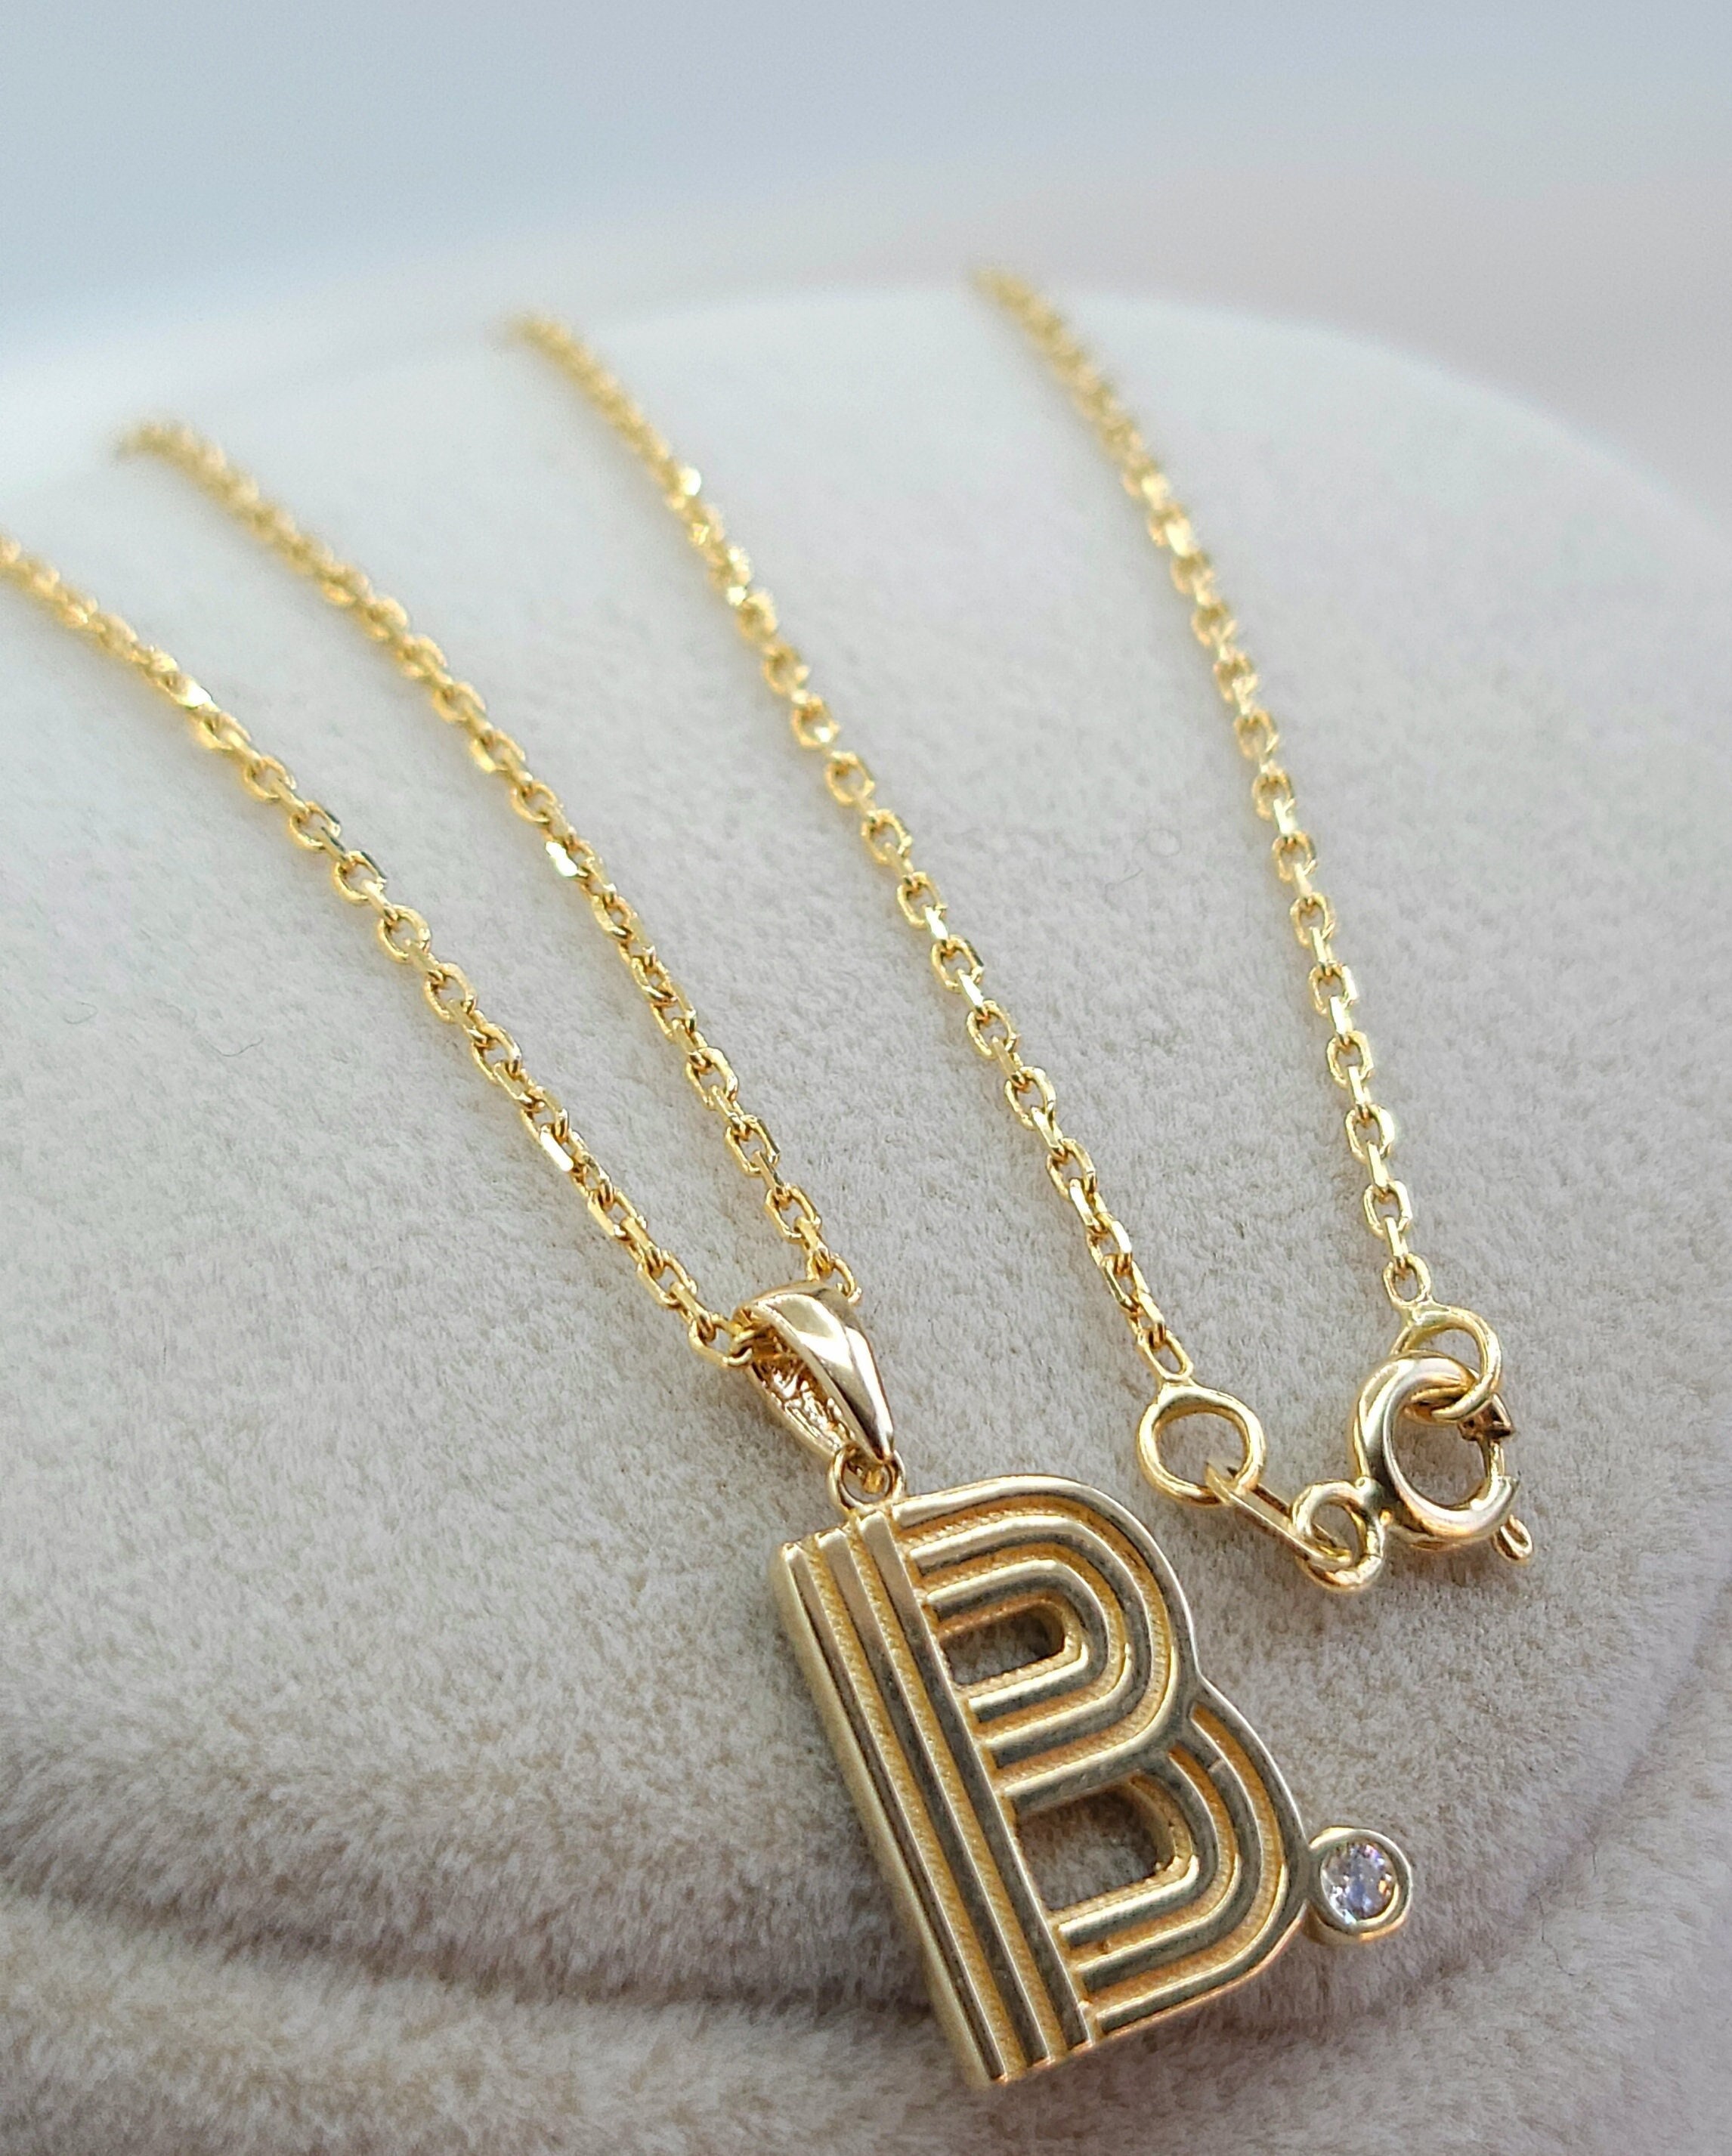 Necklaces and Chains | GOLD PLATED JEWELRY | GOLD UNIVERSE LETTER NECKLACE-LETTER  B - rommanelusa